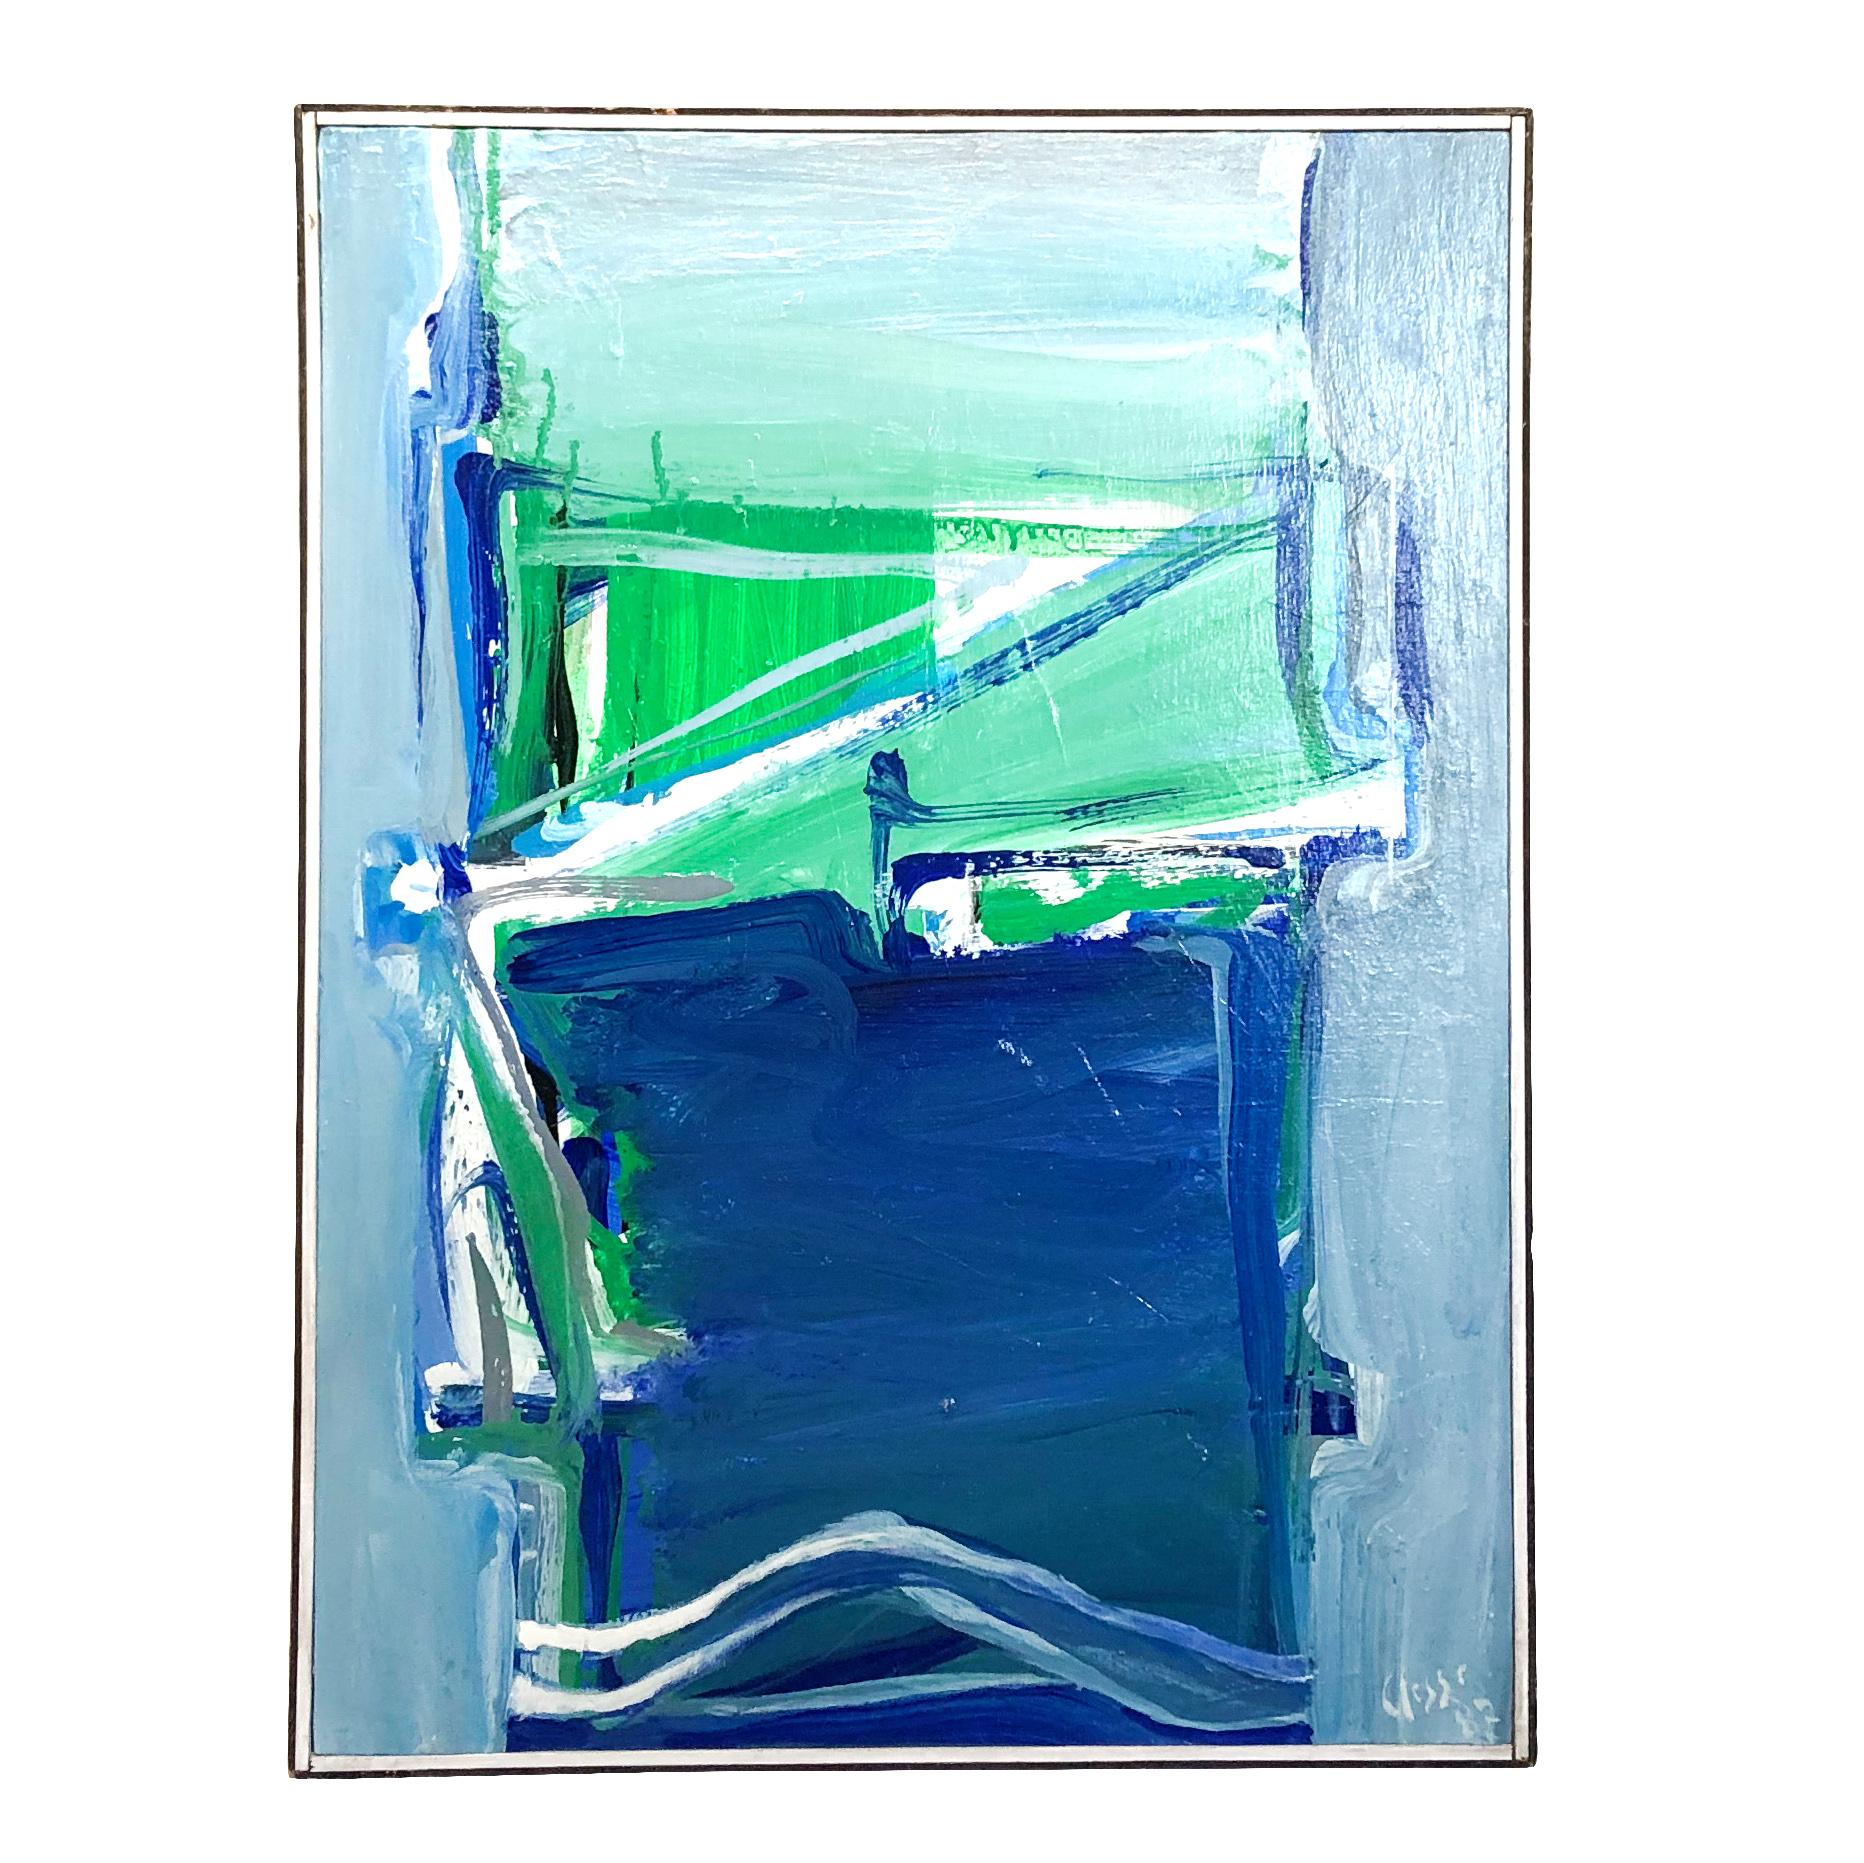 A French green, white blue abstract painting, oil on wood by Daniel Clesse, painted in France, signed and dated in 1987.

Daniel Clesse was a French painter born in 1932 Paris, France and passed away in 2016. He and his wife Christiane Clesse